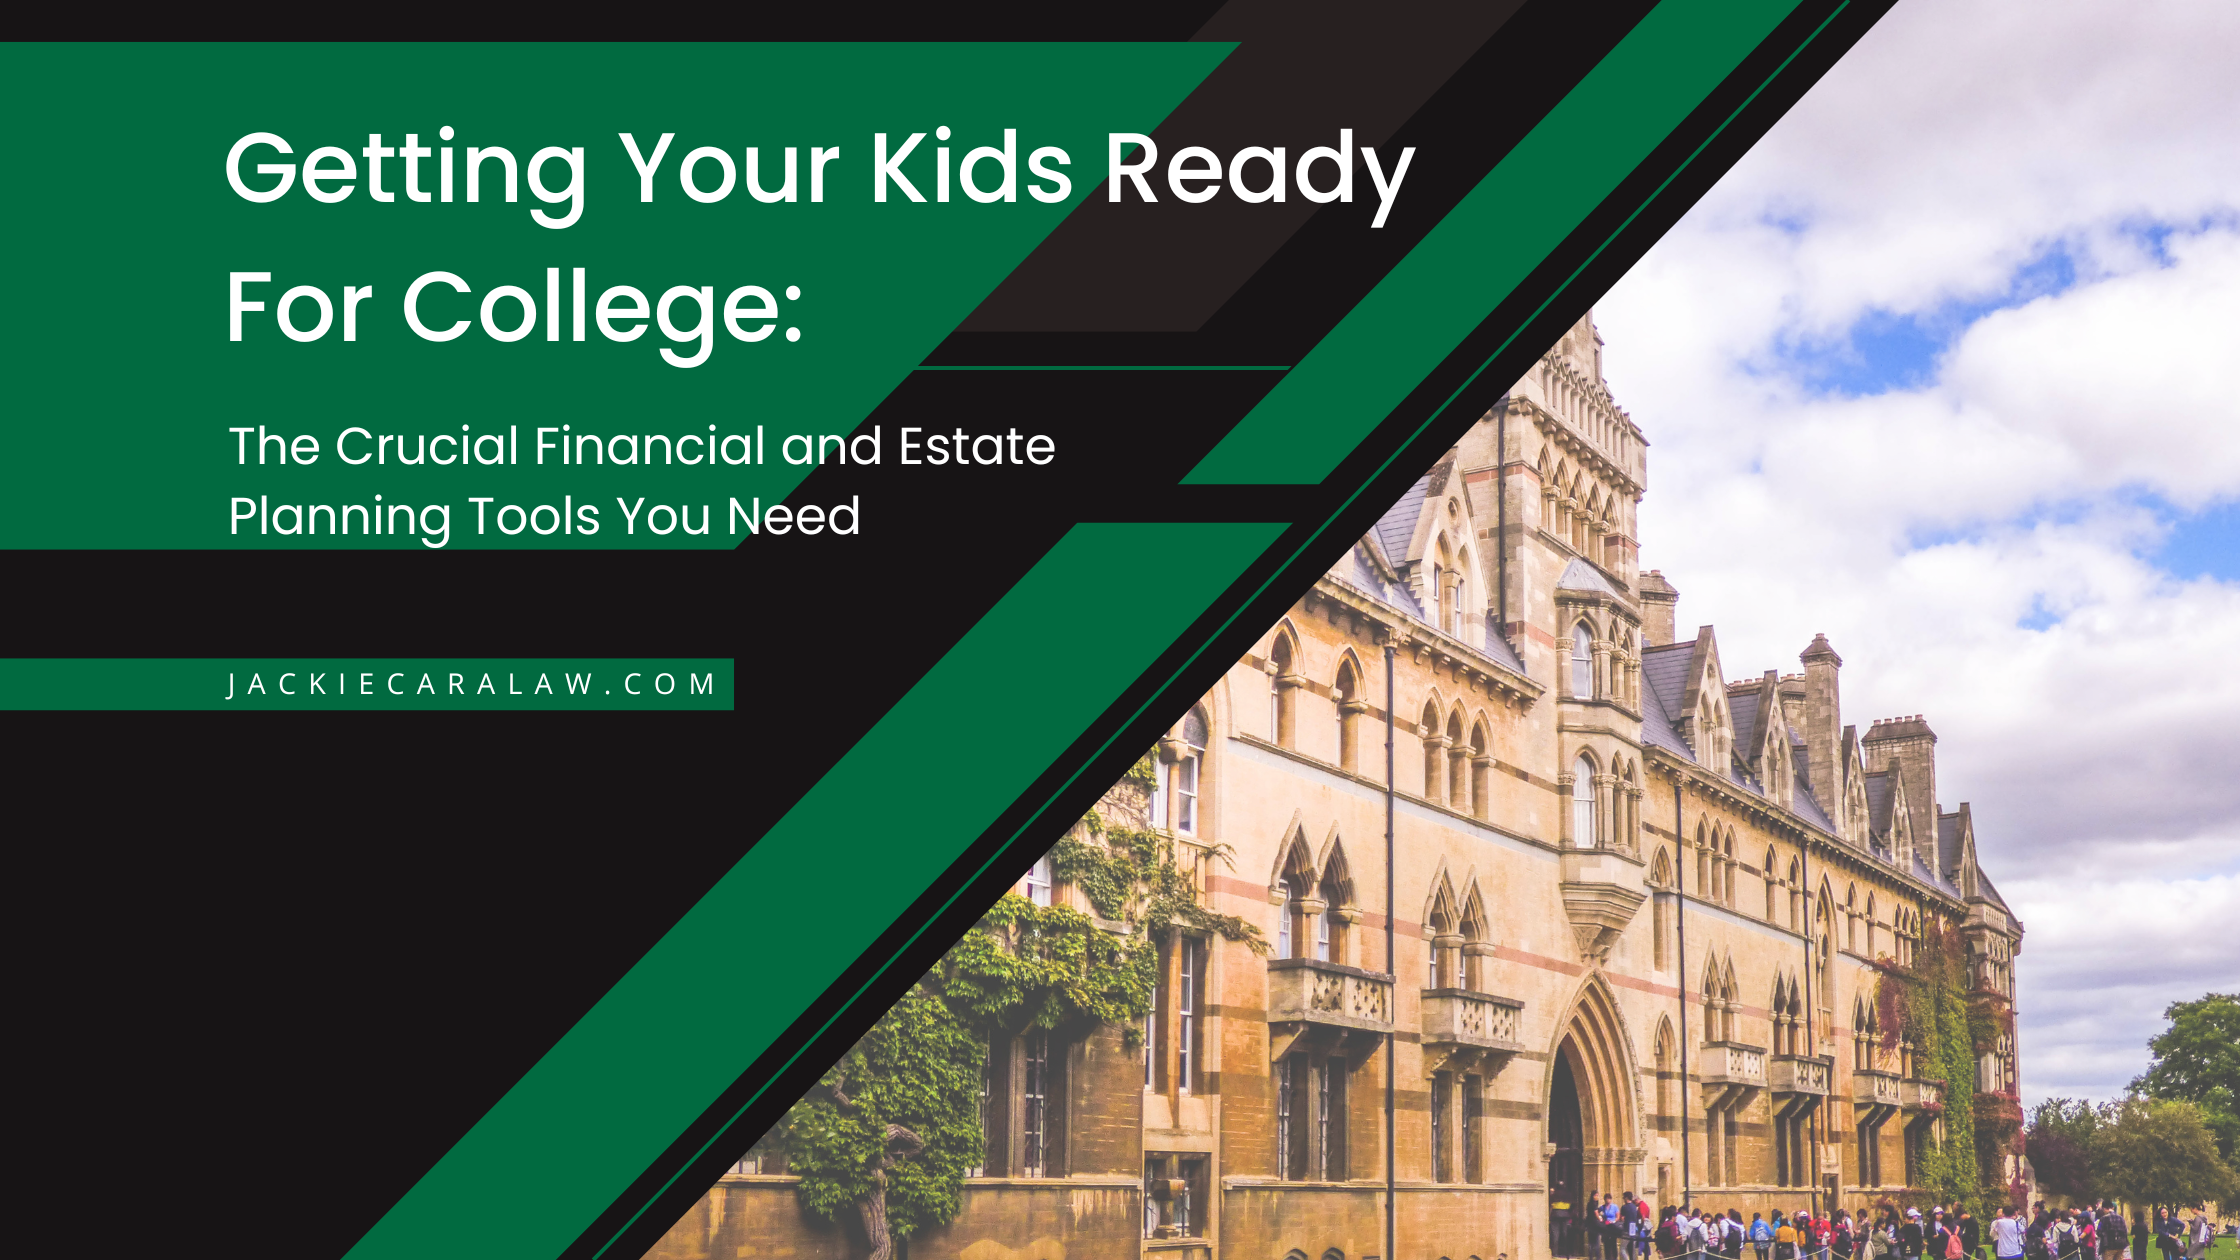 Getting Your Kids Ready for College: The Crucial Financial and Estate Planning Tools You Need